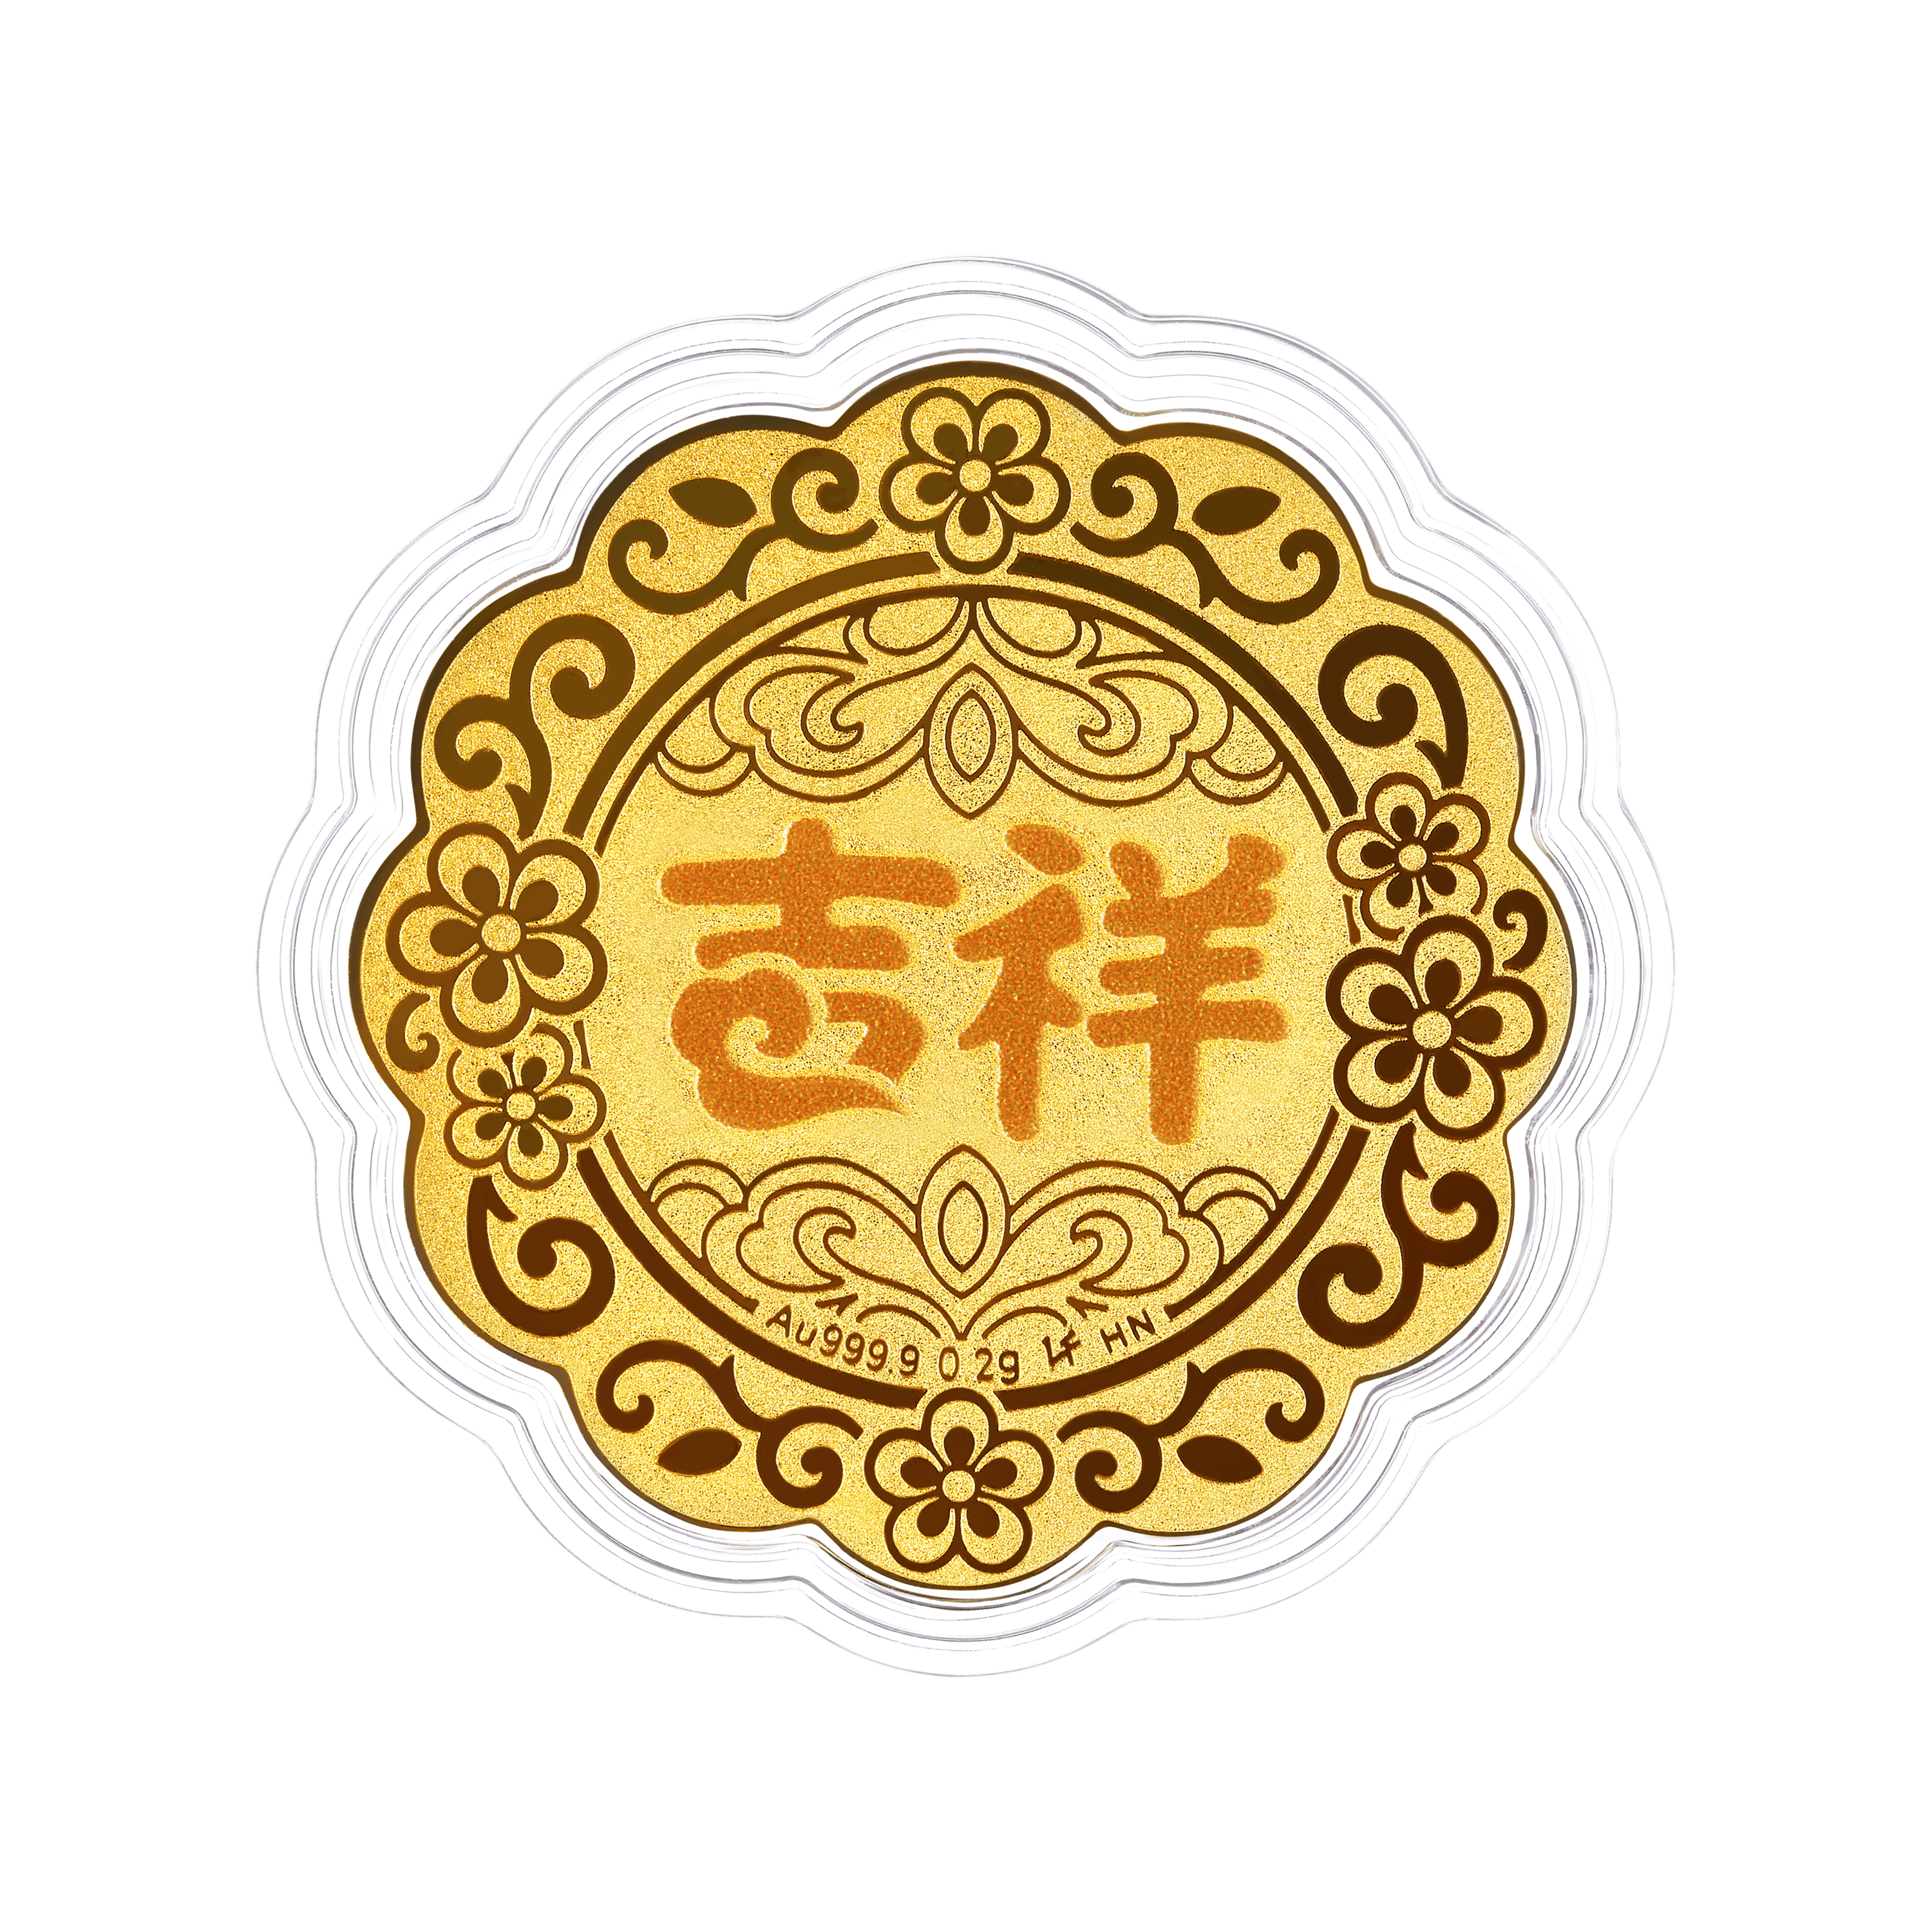 “Seven Stars around the Moon” Gold Mooncake Accessory